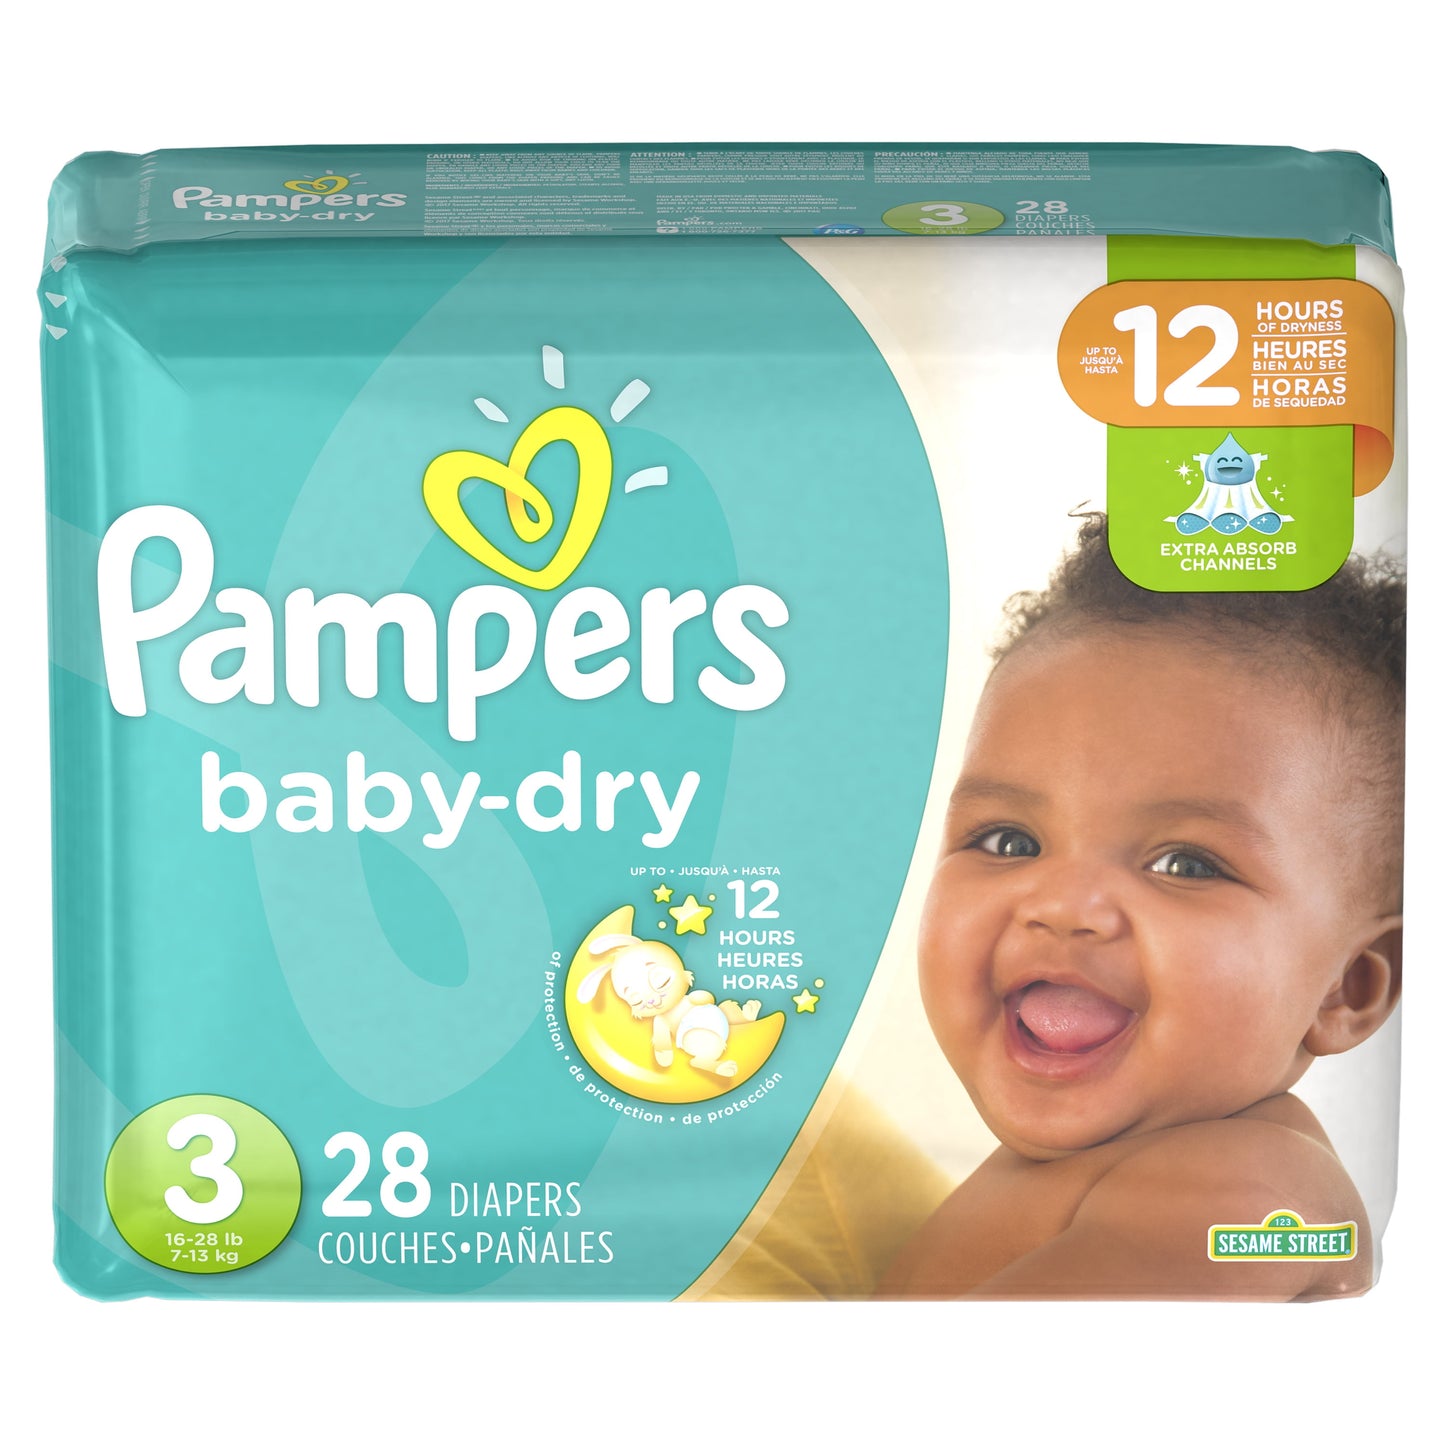 Pampers Baby-Dry Diapers, Size 3, 28 Count